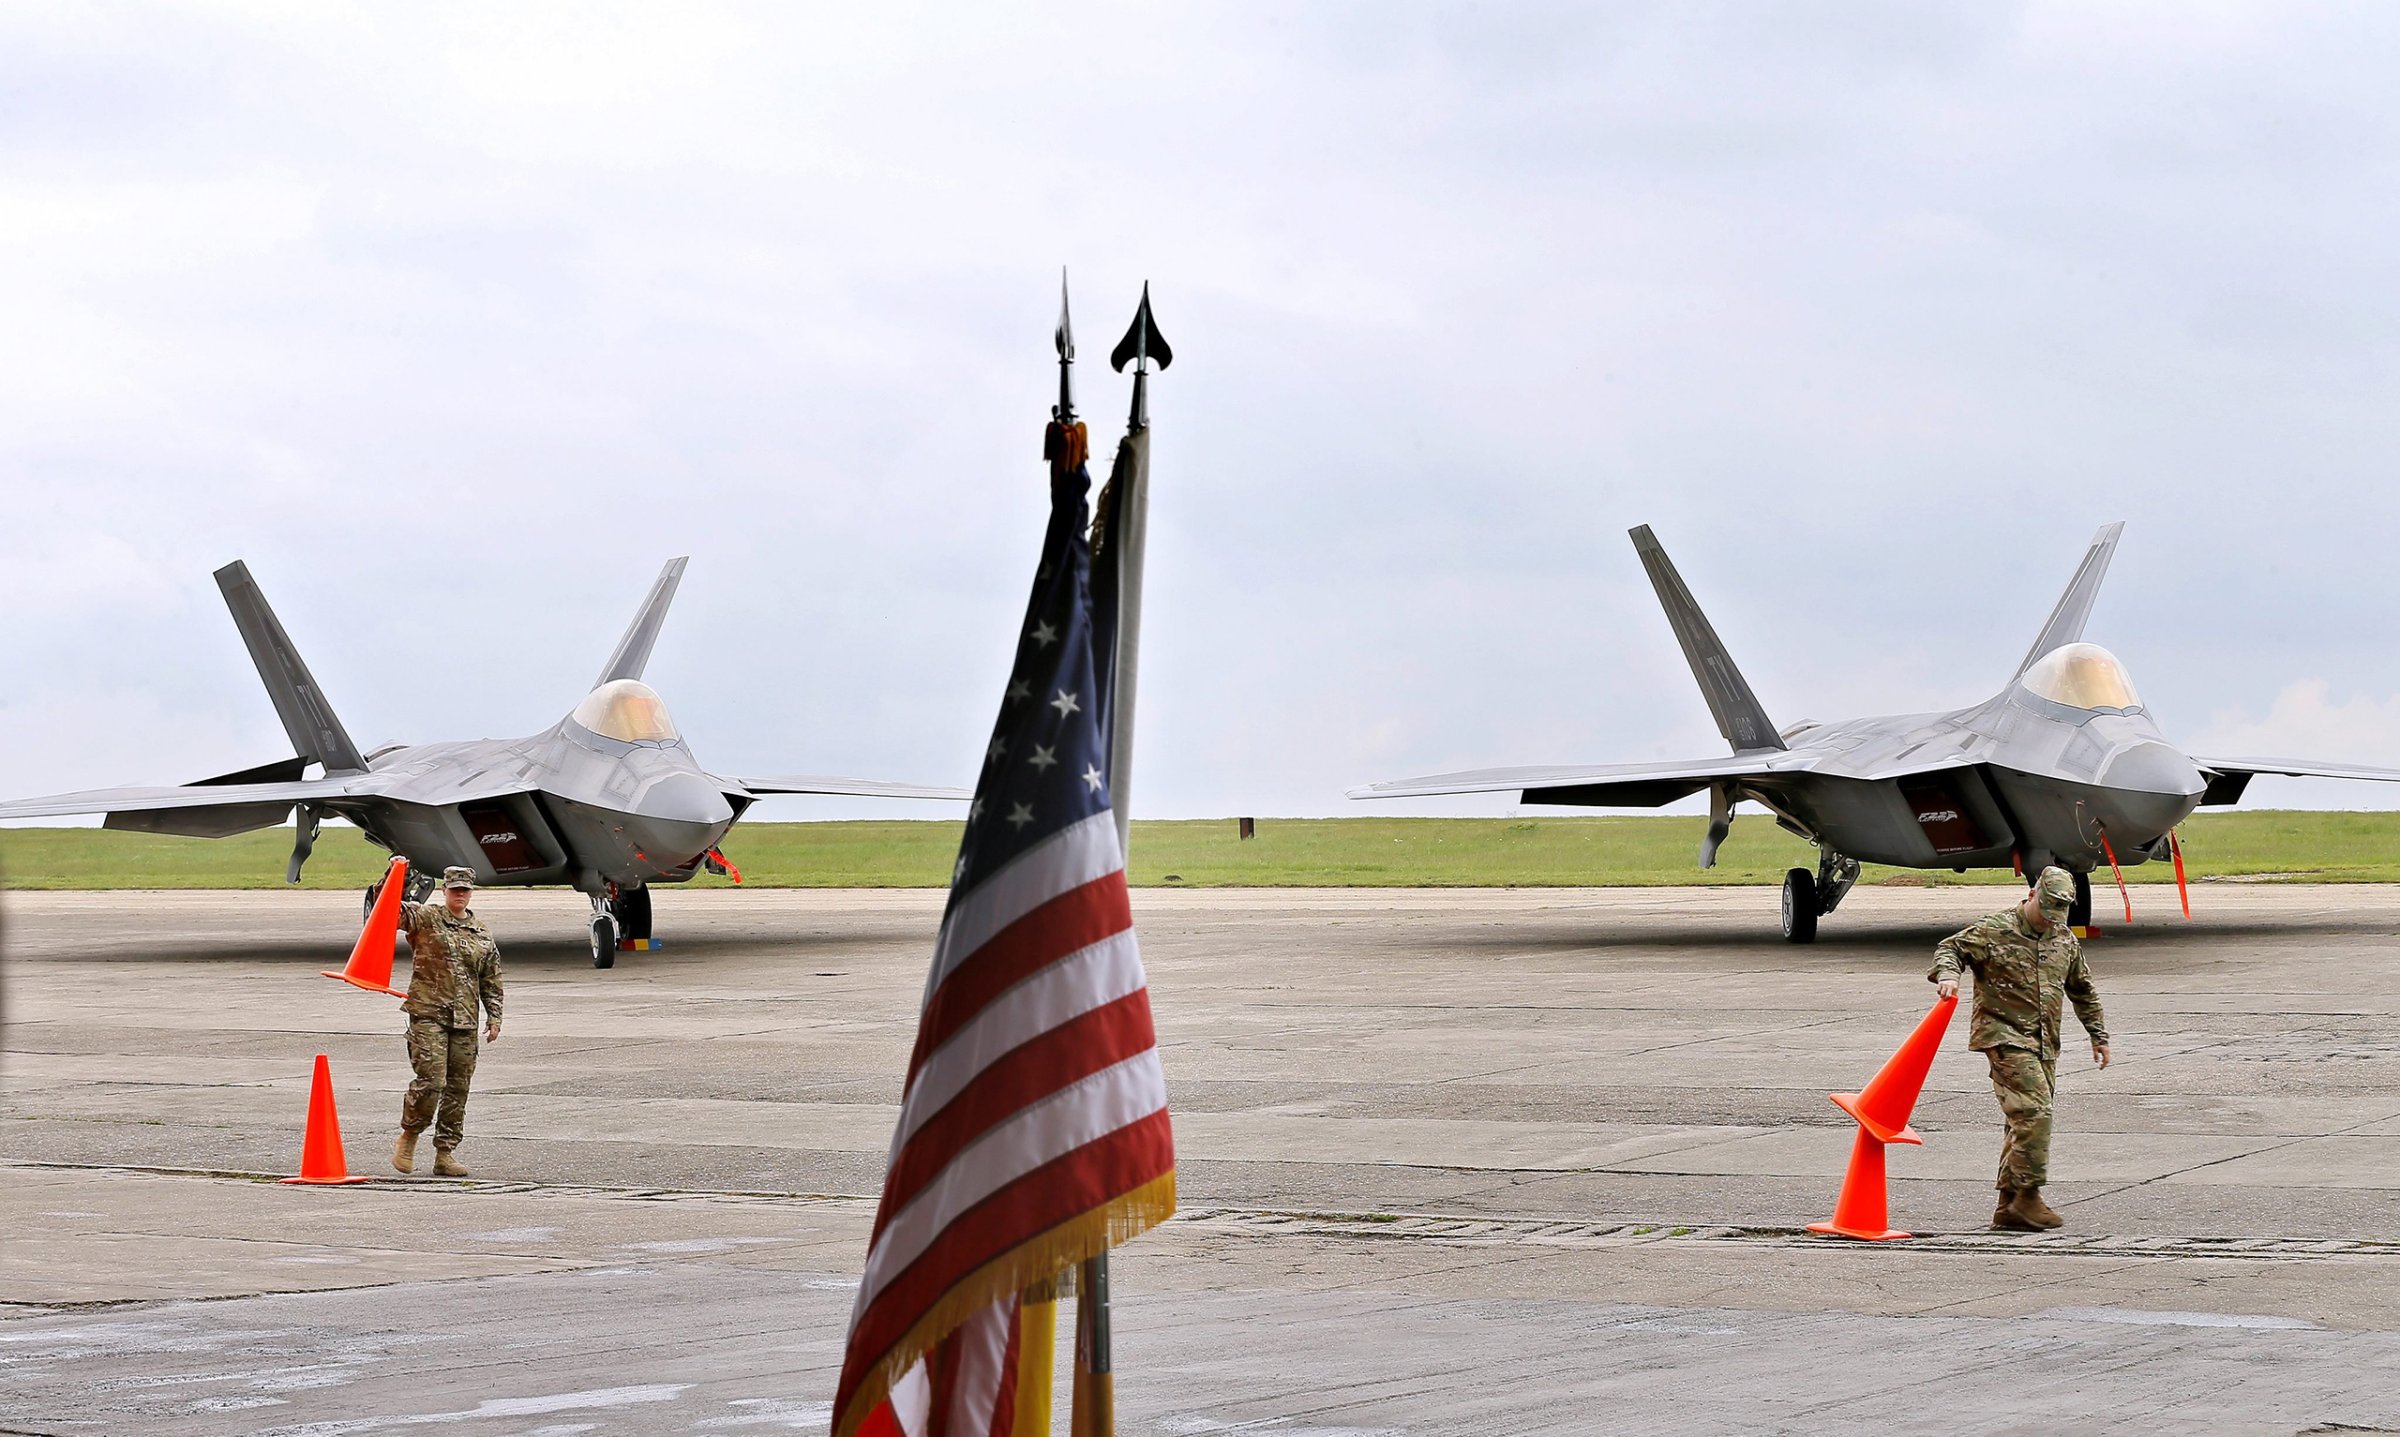 Romanian and US national flags in between two F22 Raptor jets of the US Air Force that landed at the Mijhail Kogalniceanu military airbase, near the Black Sea, Romania, April 25 2016.